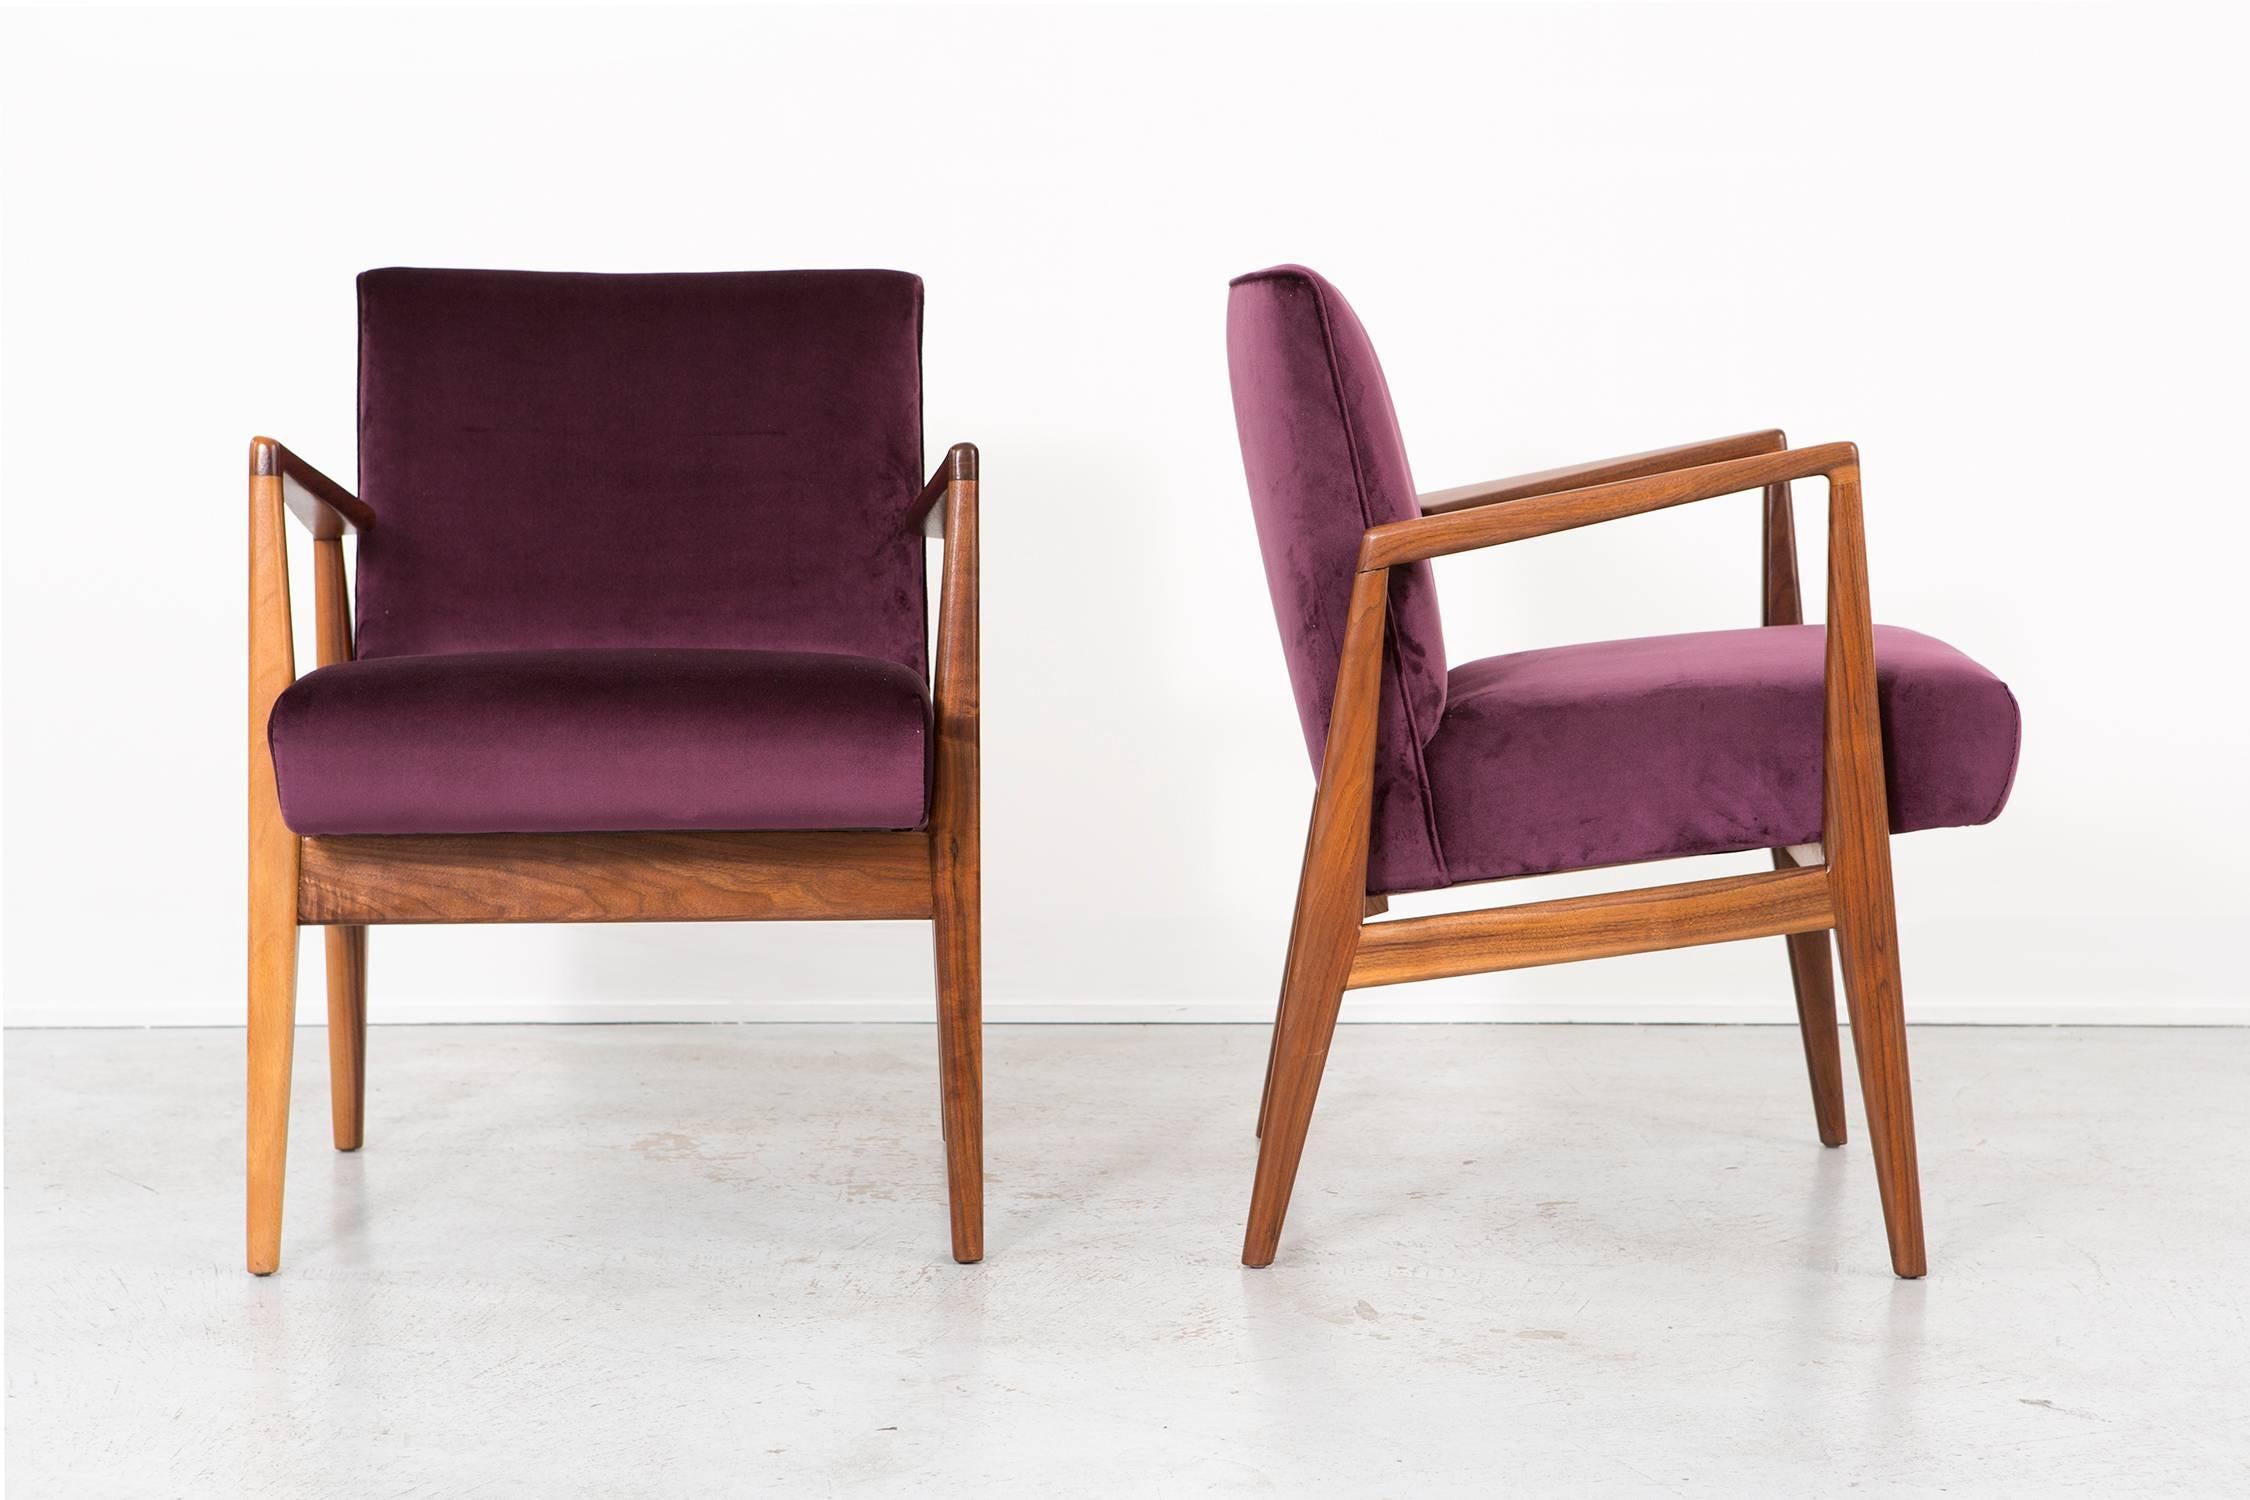 Set of two lounge chairs

Designed by Jens Risom for Jens Risom Design

USA, circa 1950s

Reupholstered in plum velvet (sourced from the UK) and walnut

Measures: 31 ?” H x 23” W x 25 ½” D x seat 19 ¾” H.

Sold as a set.